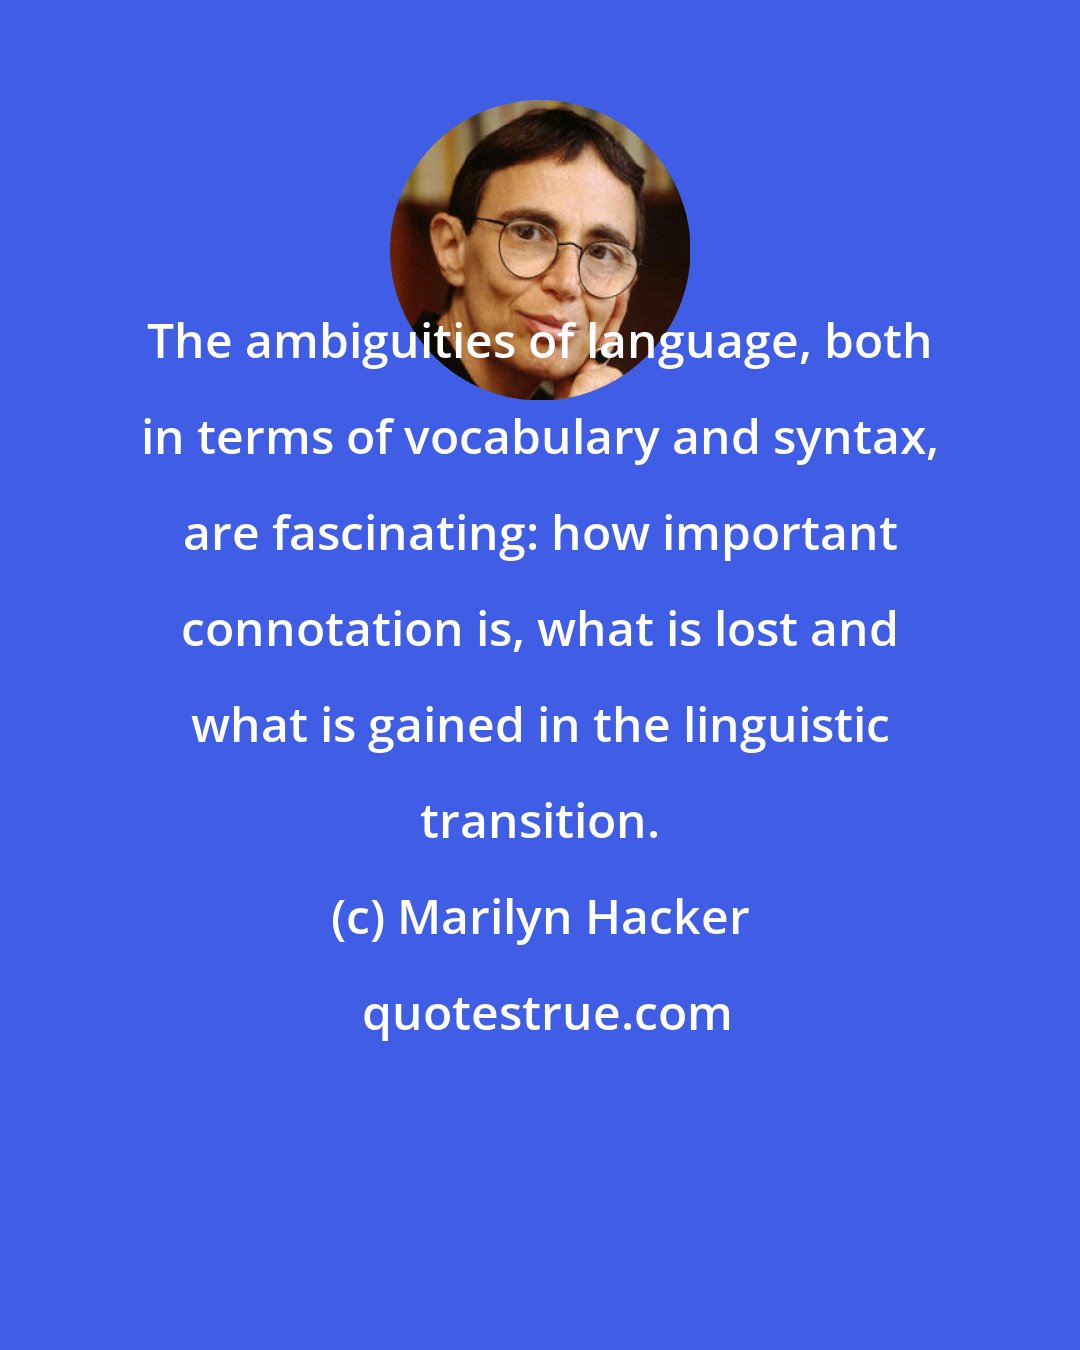 Marilyn Hacker: The ambiguities of language, both in terms of vocabulary and syntax, are fascinating: how important connotation is, what is lost and what is gained in the linguistic transition.